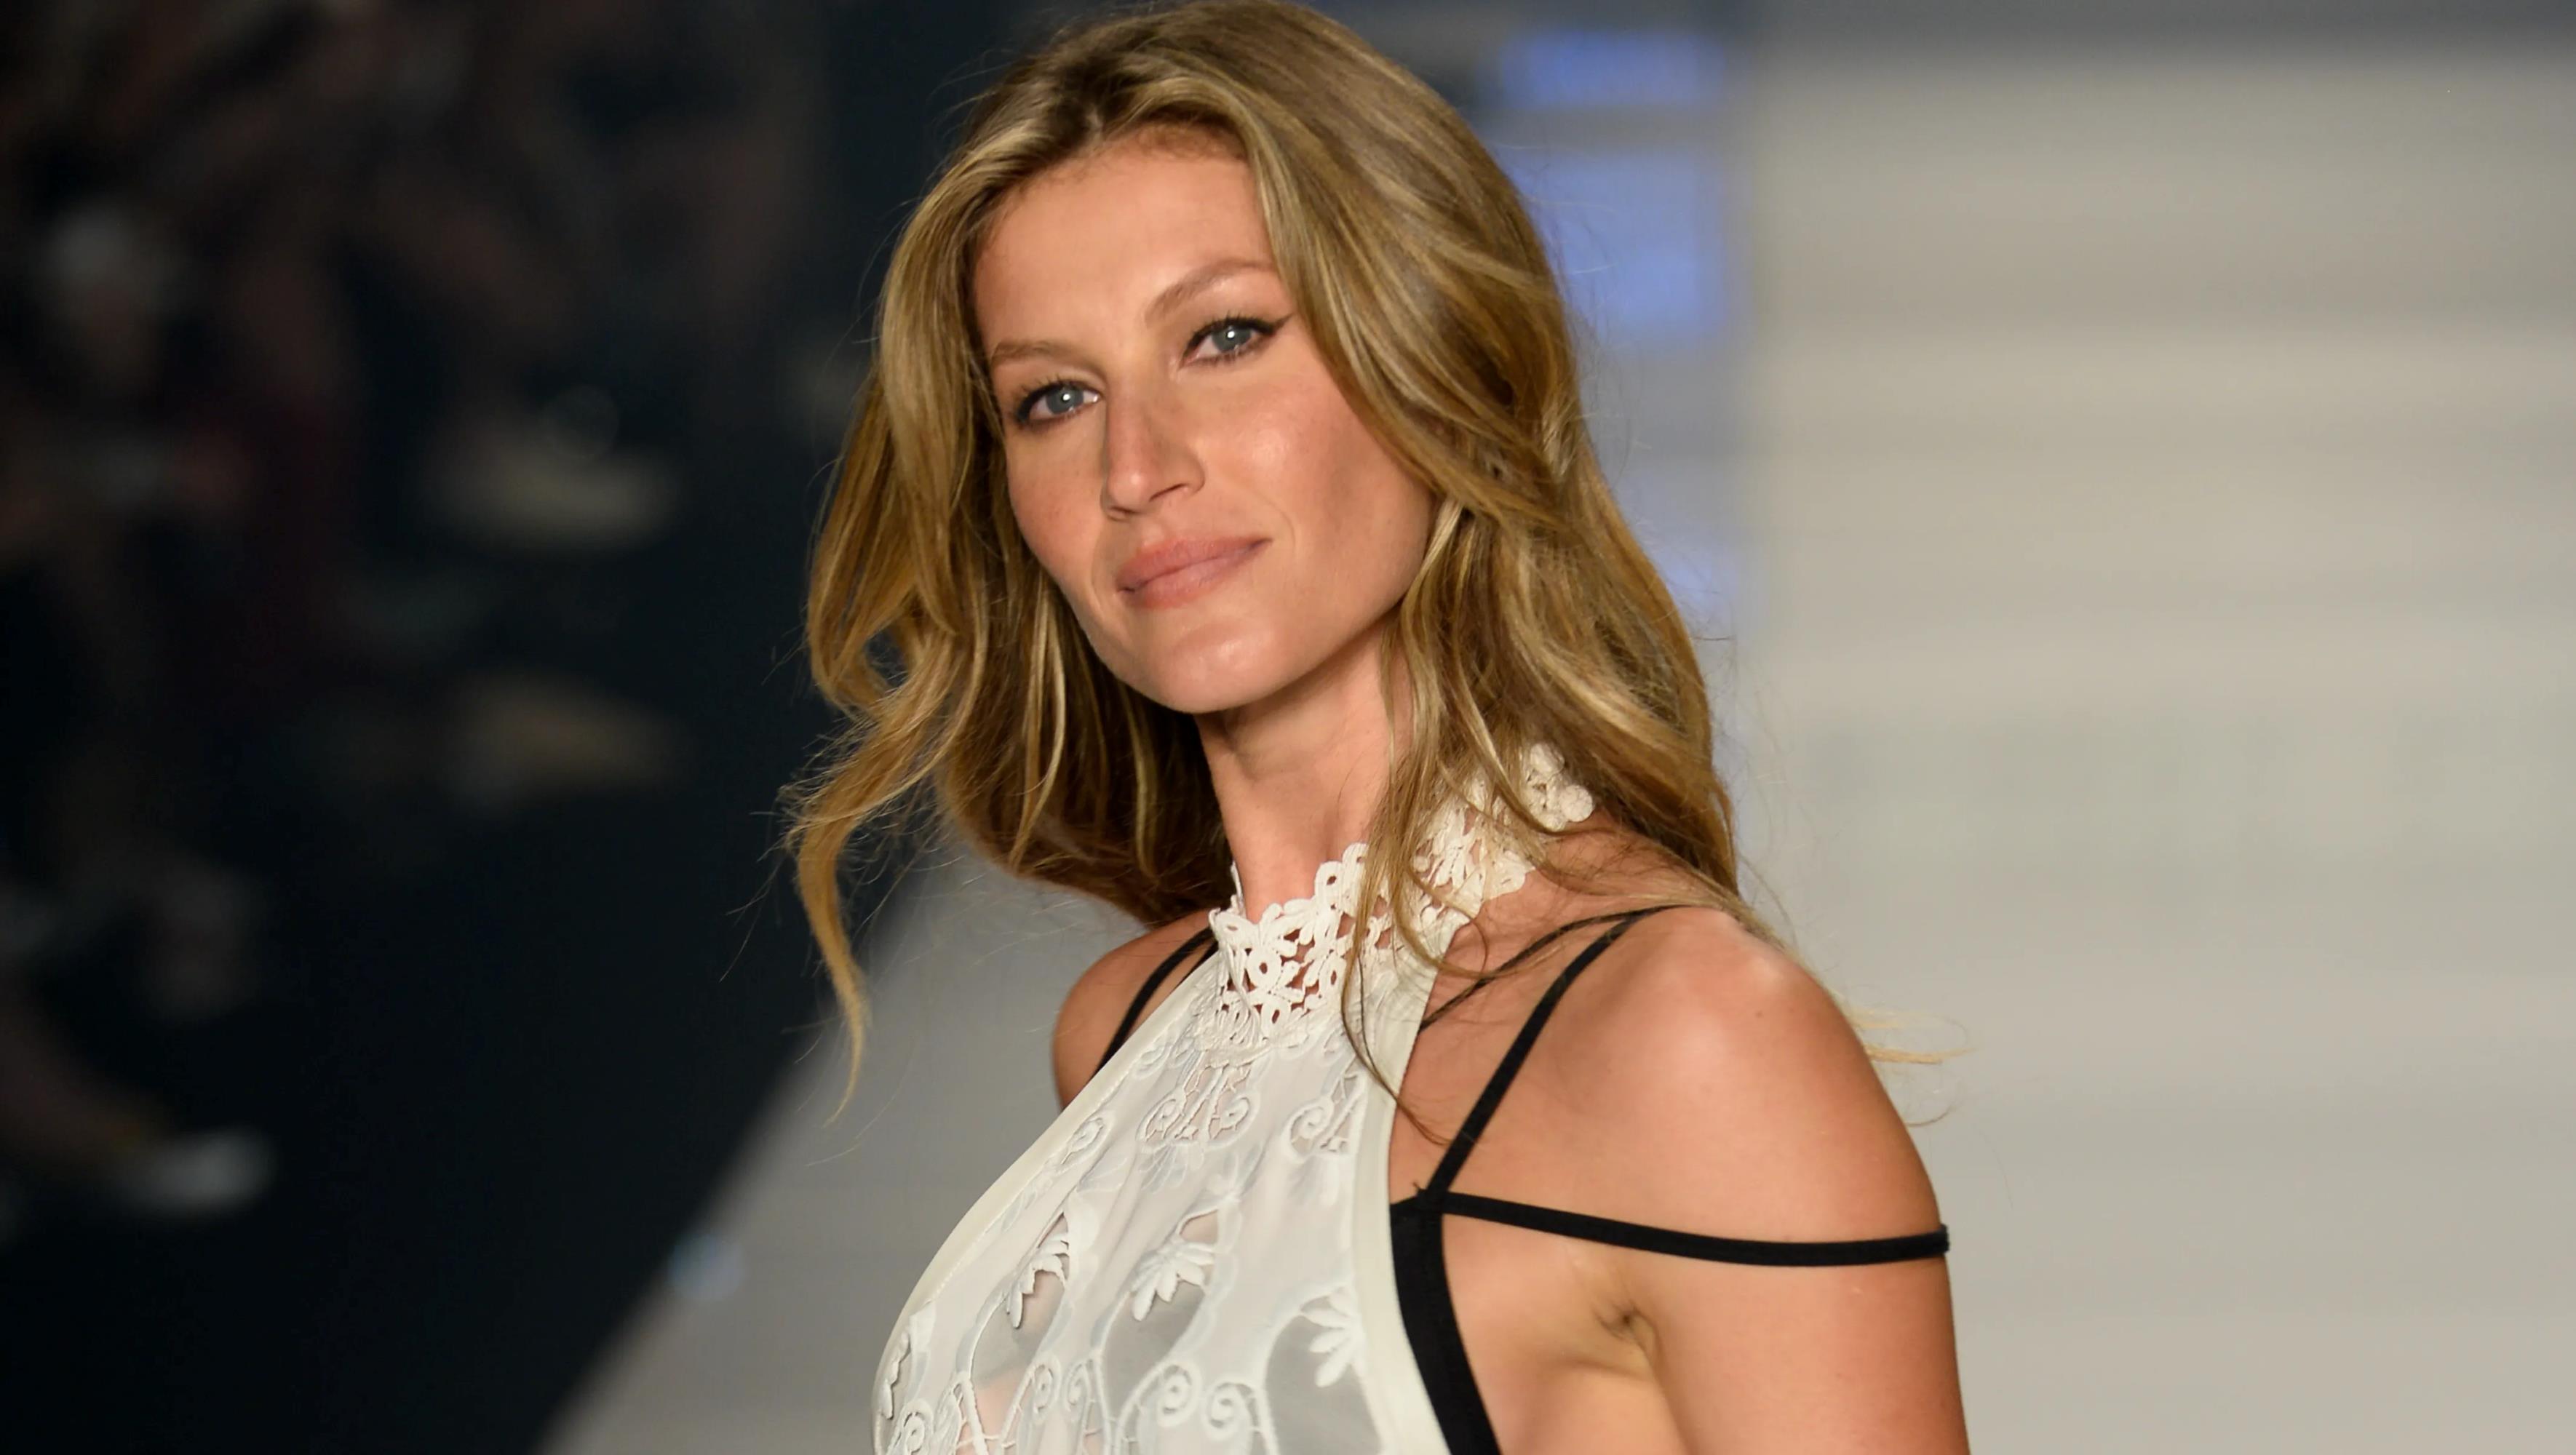 gisele-bundchen-adds-9-1m-mansion-to-her-real-estate-collection-with-help-from-jiu-jitsu-pals-sister-in-law